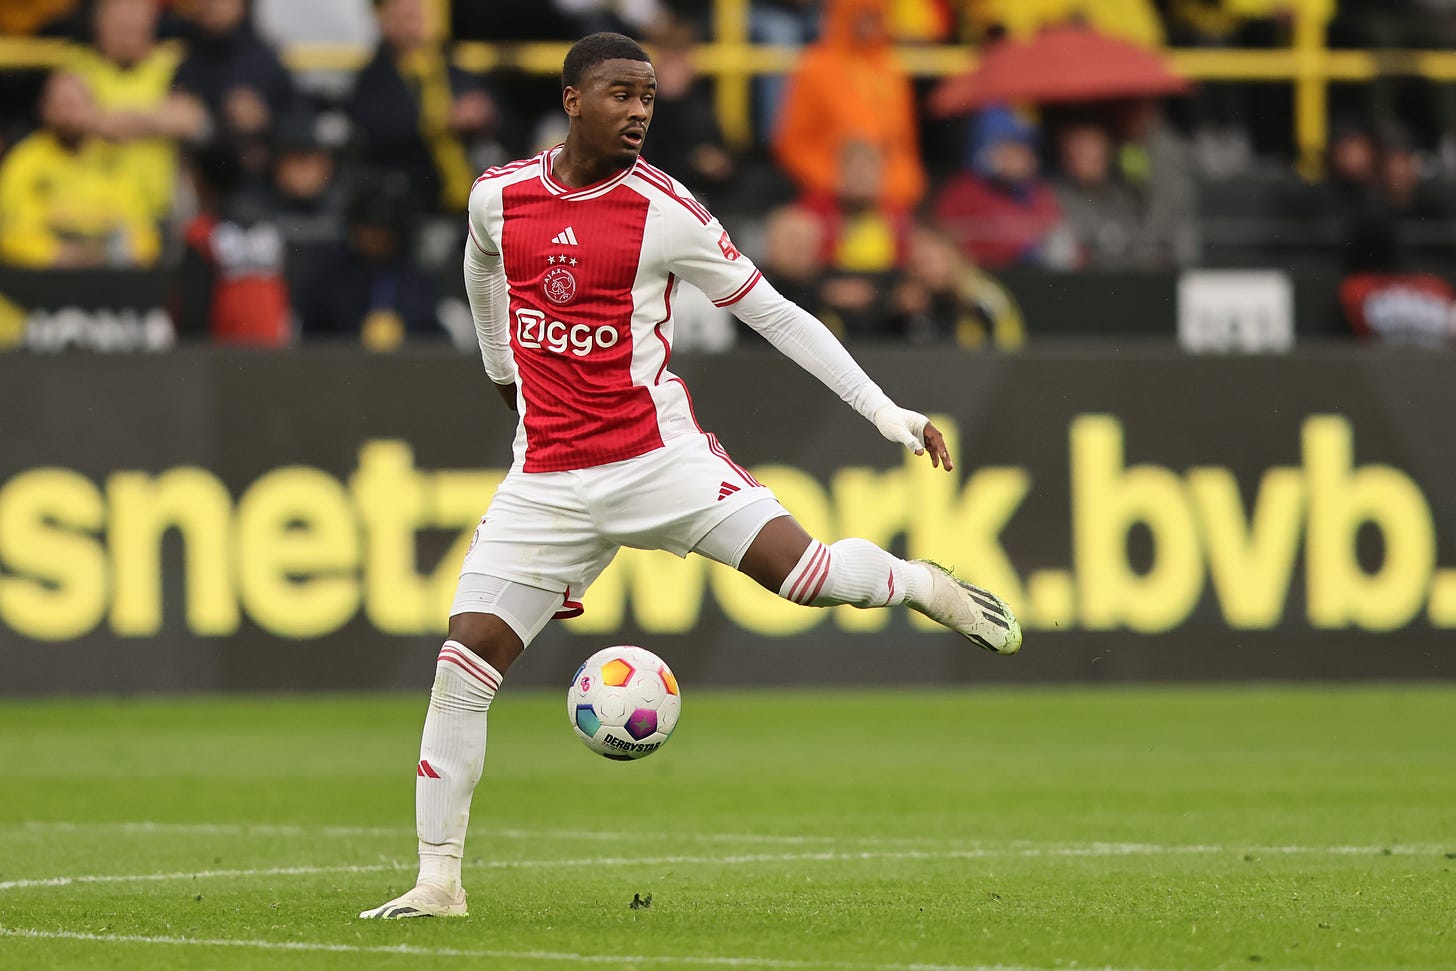 Jorrel Hato pictured playing for Ajax